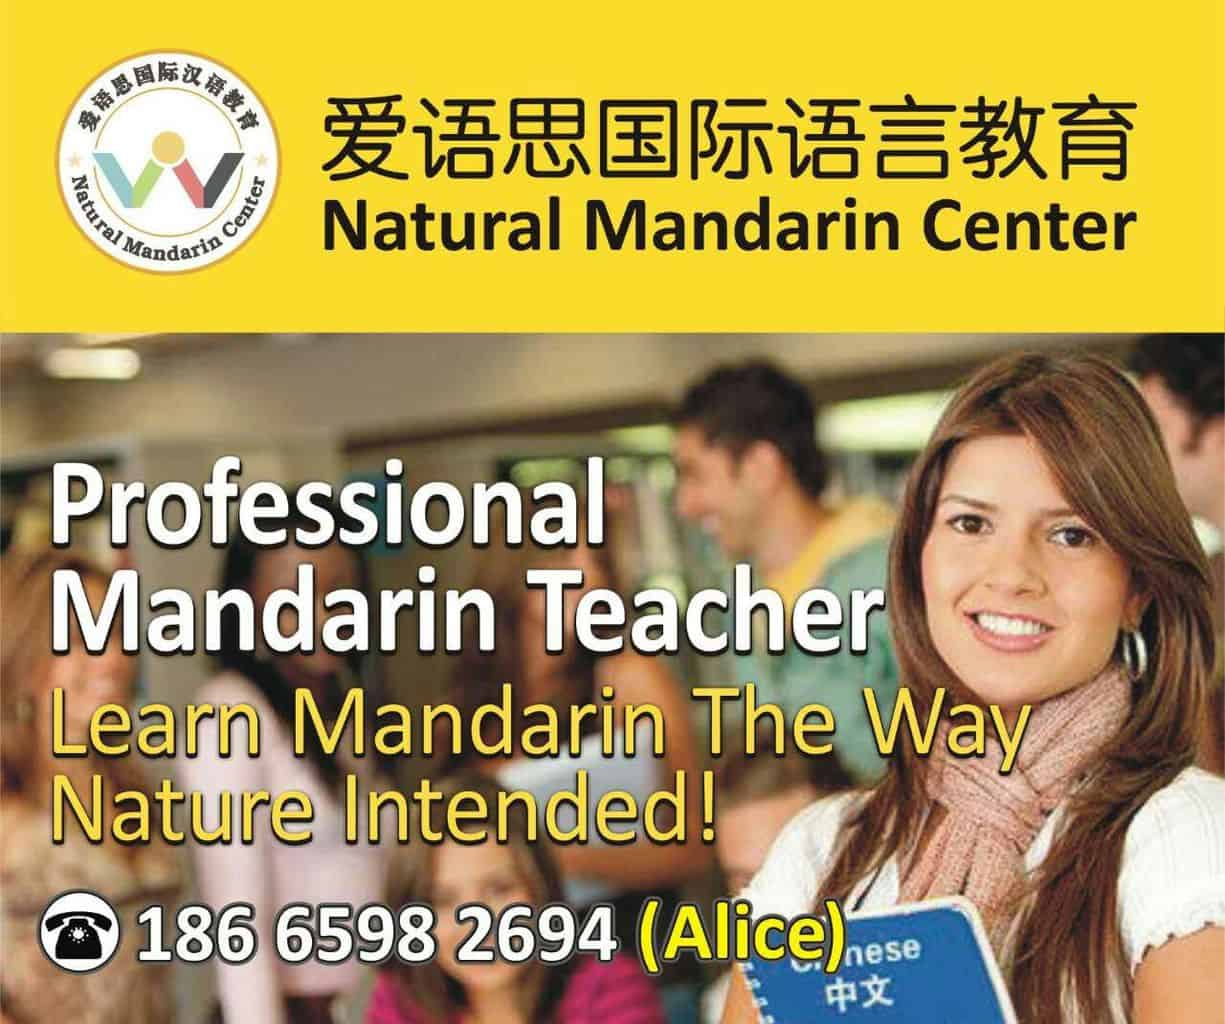 Featured image for “Natural Mandarin”